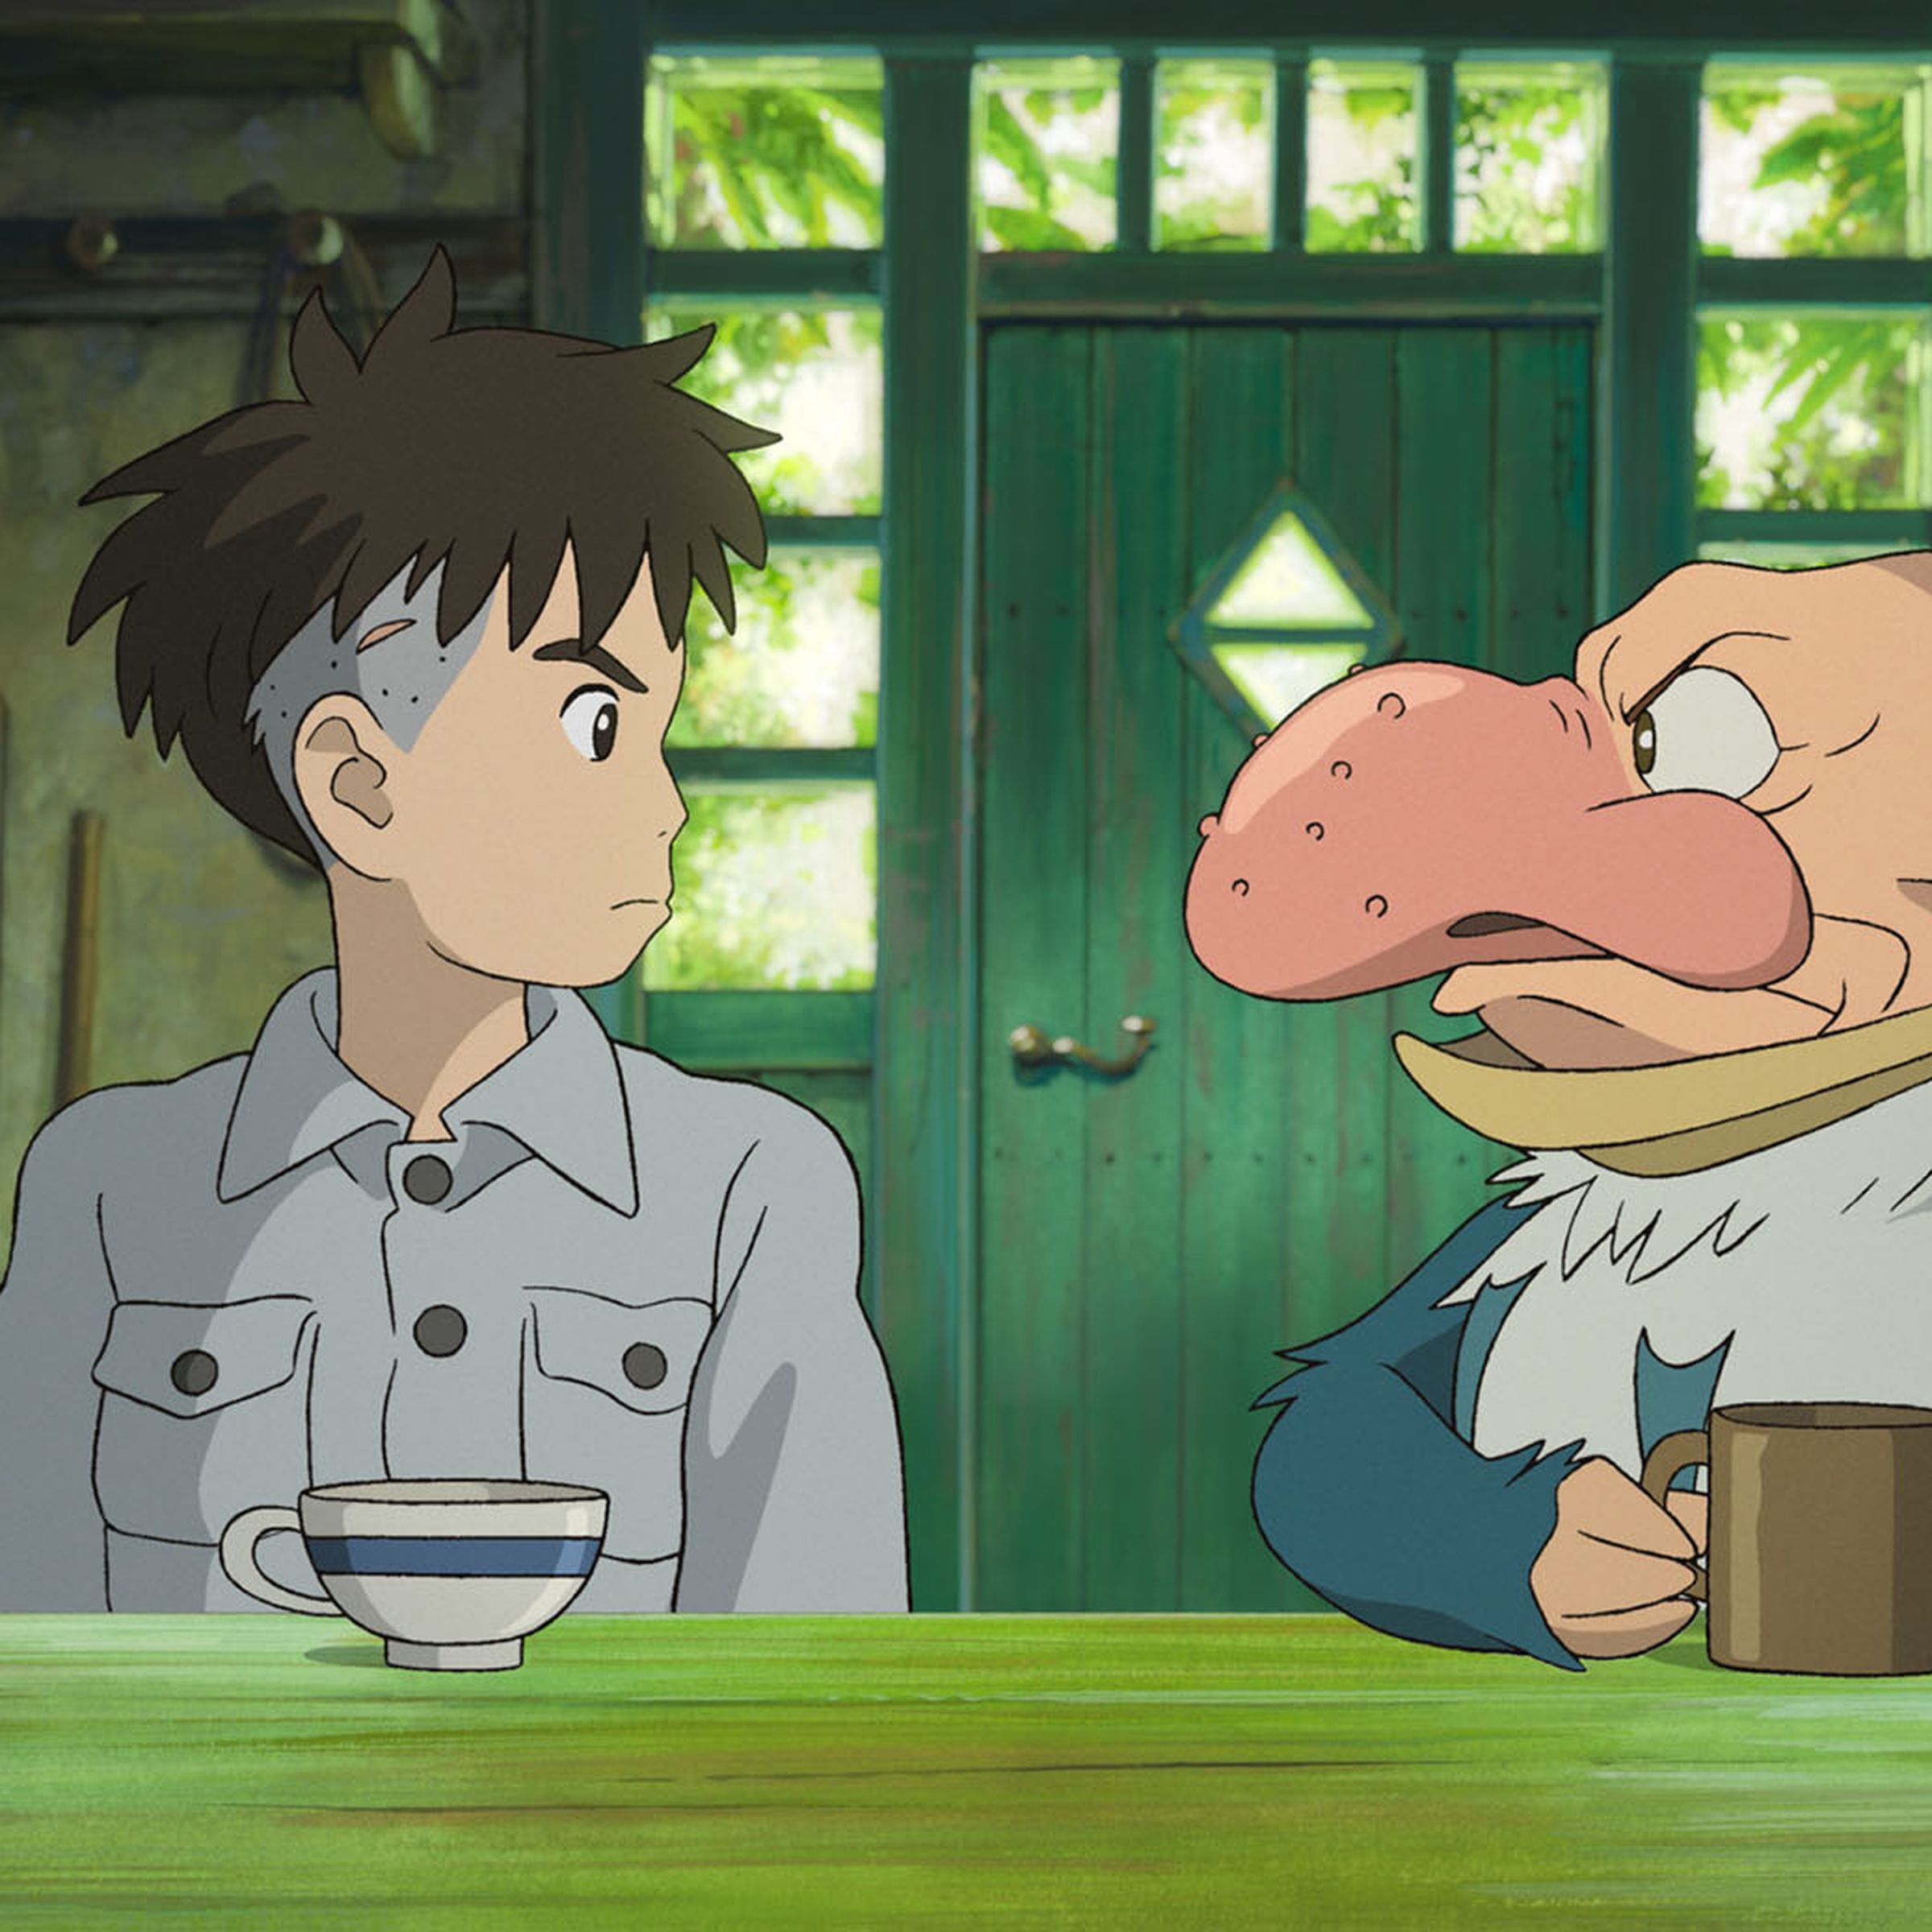 A still image from the Studio Ghibli film The Boy and the Heron.